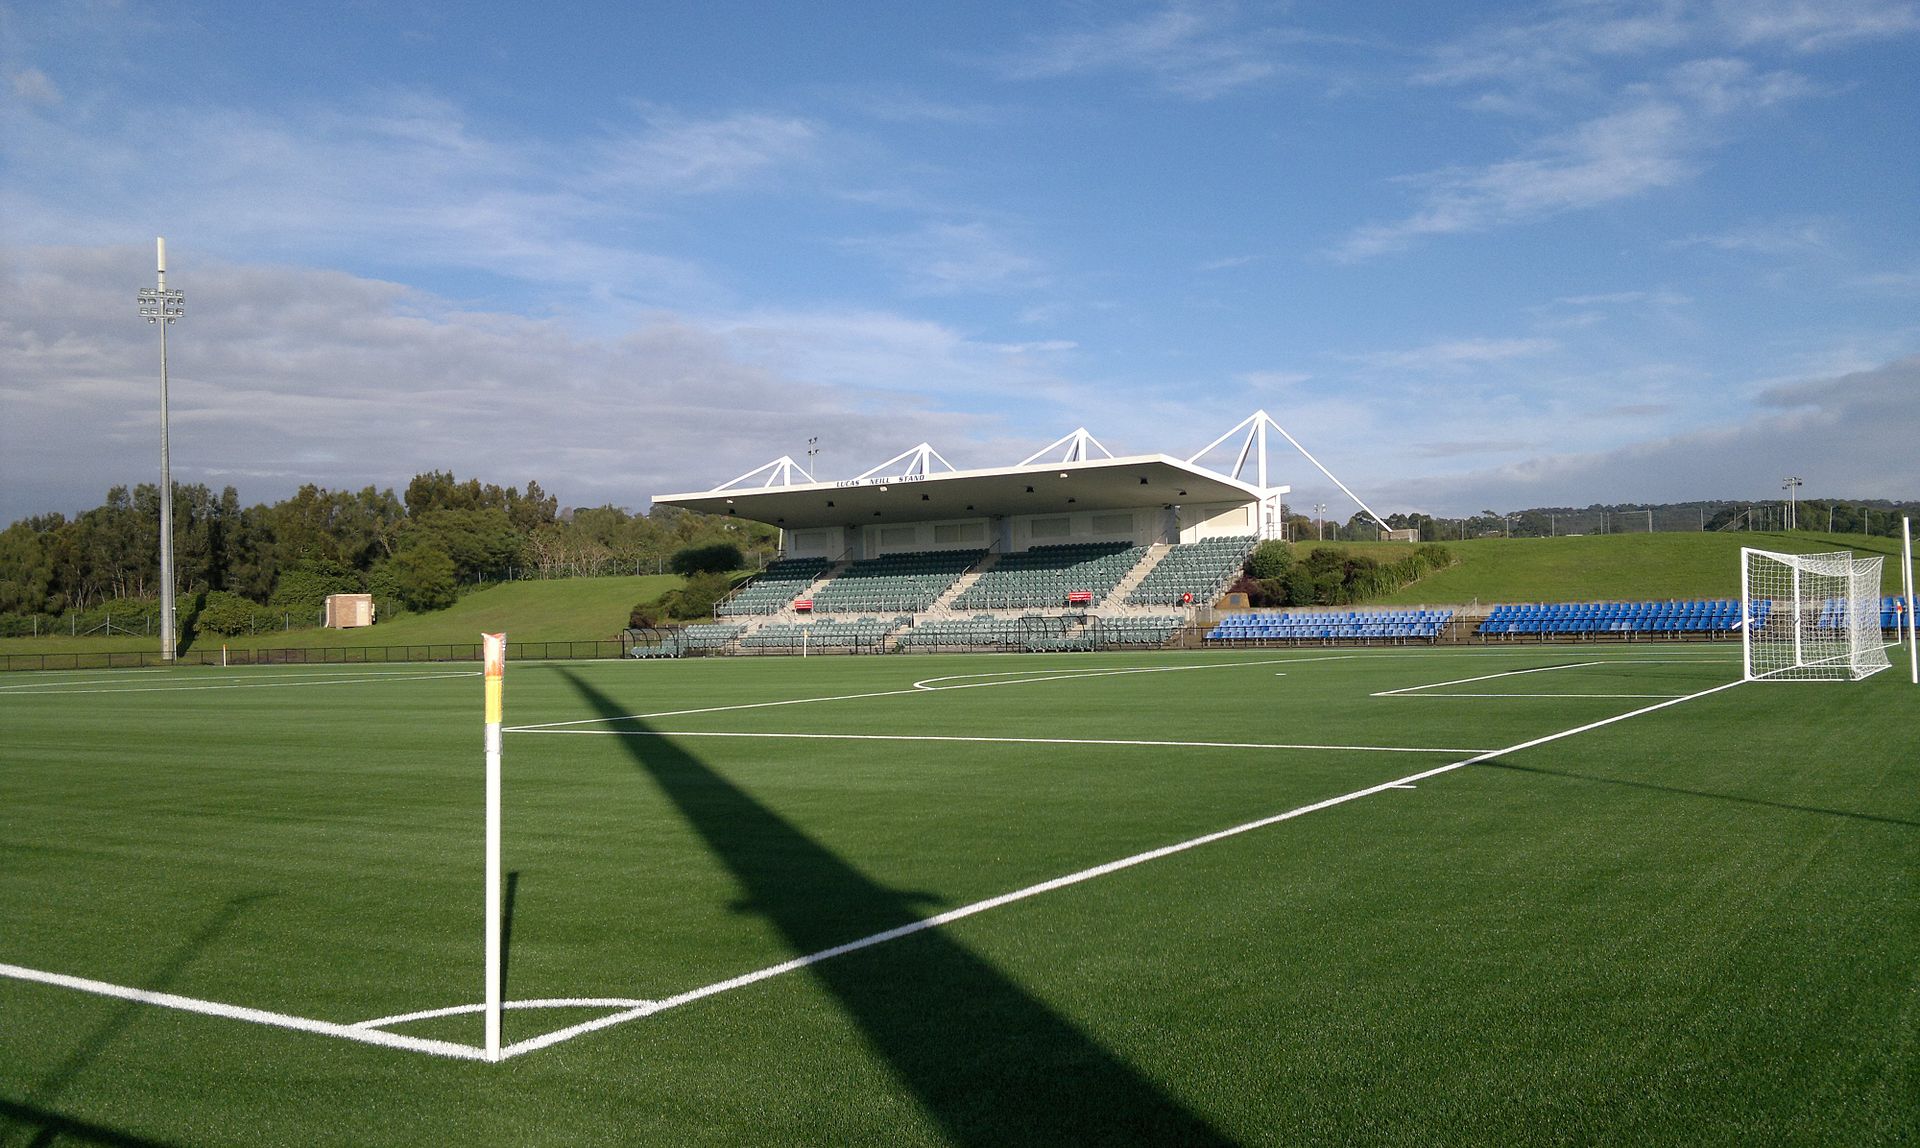 Cromer Park Synthetic Playing Surface. tormwater harvesting was integrated into the design of the synthetic field to irrigate fields 2, 3, 4 and 5 at Cromer Park